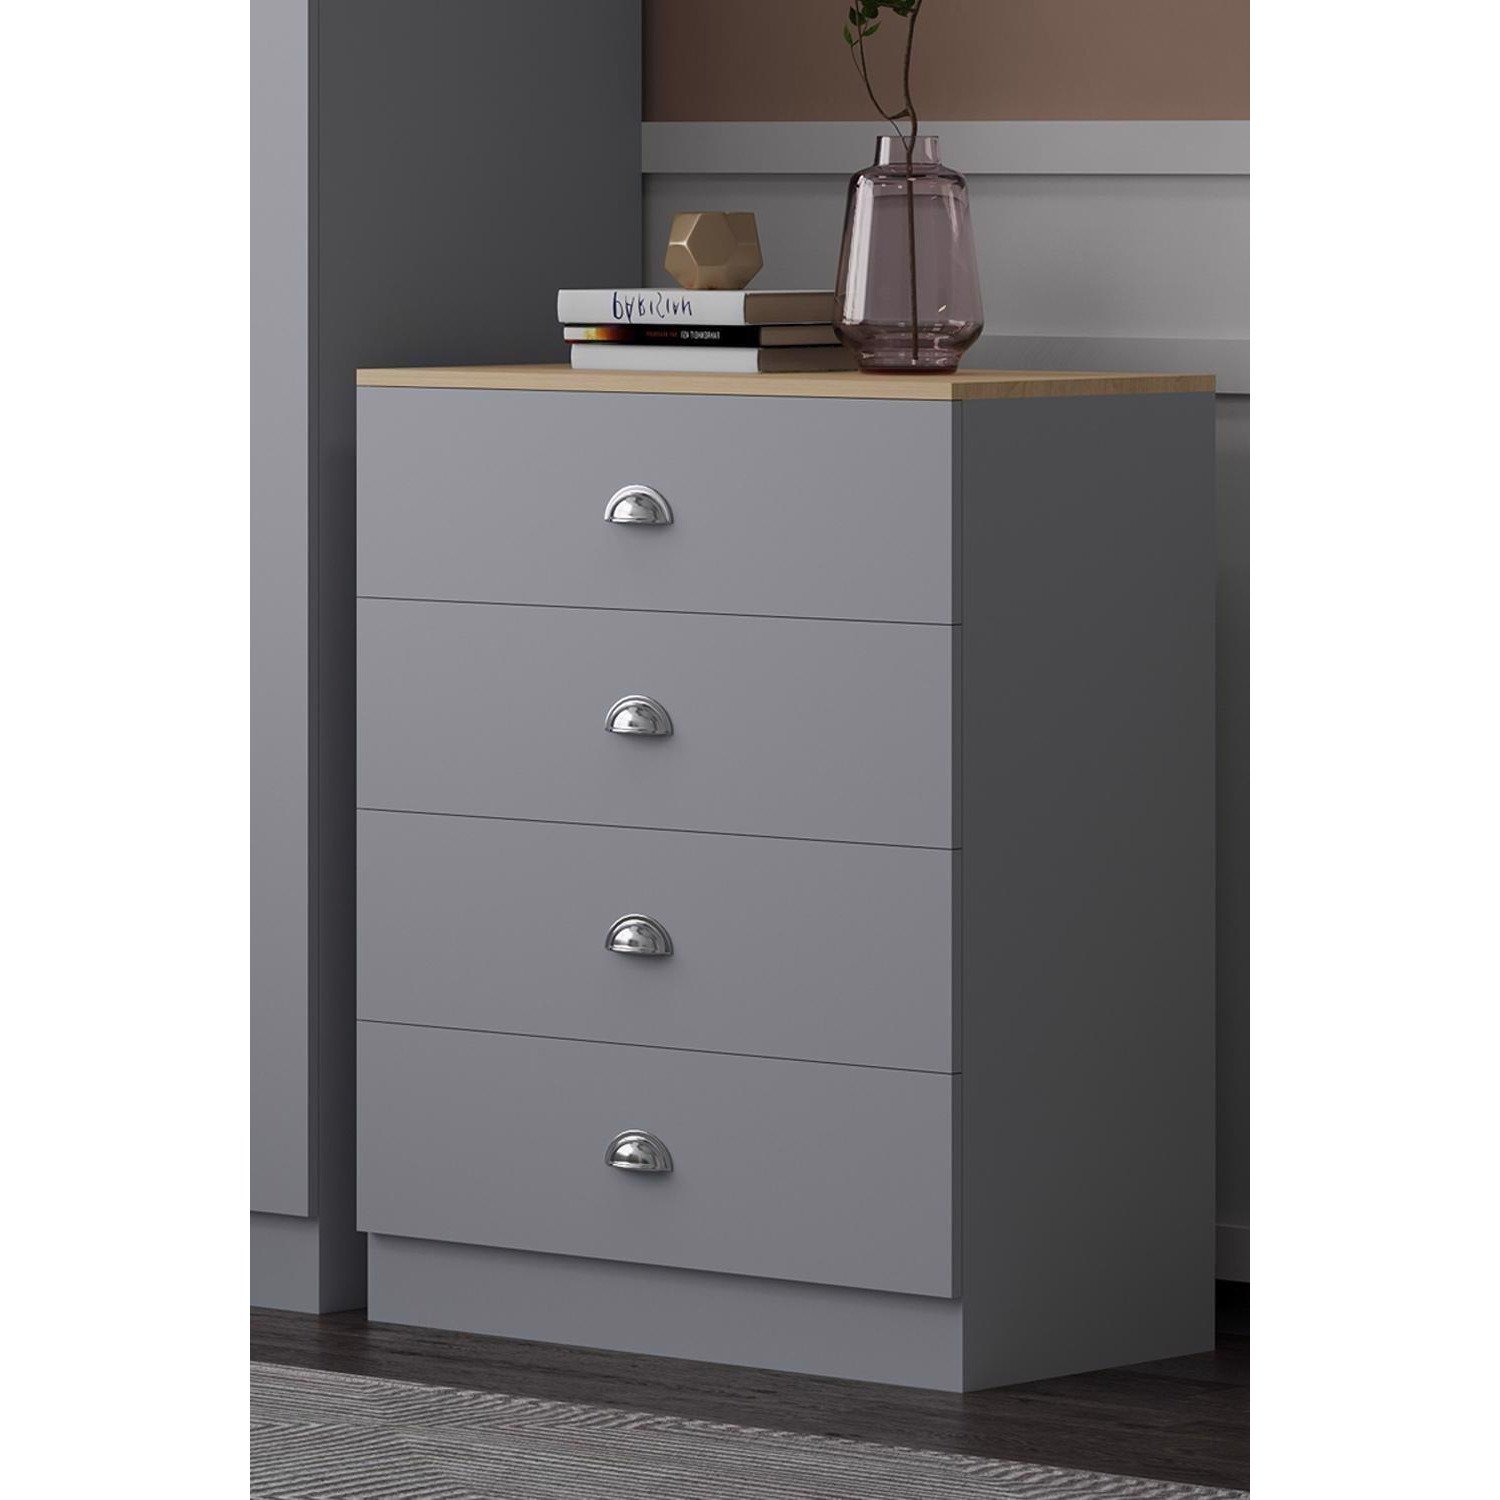 4 Drawer Chest Of Drawers Matt Grey Finish With Oak Top - image 1